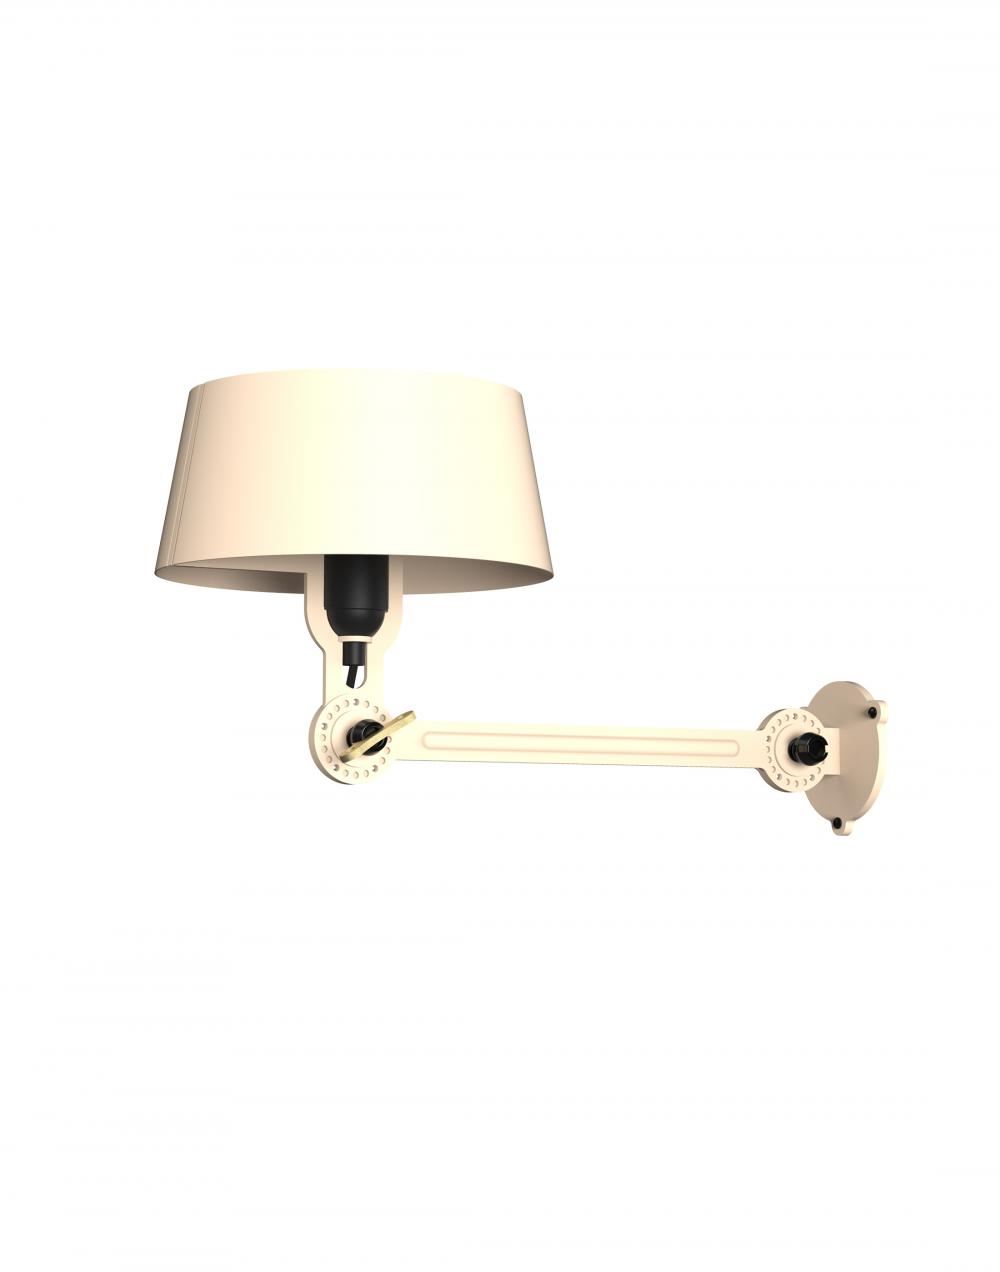 Bolt Wall Lamp Under Fit Lightning White Cord Switch And Plug